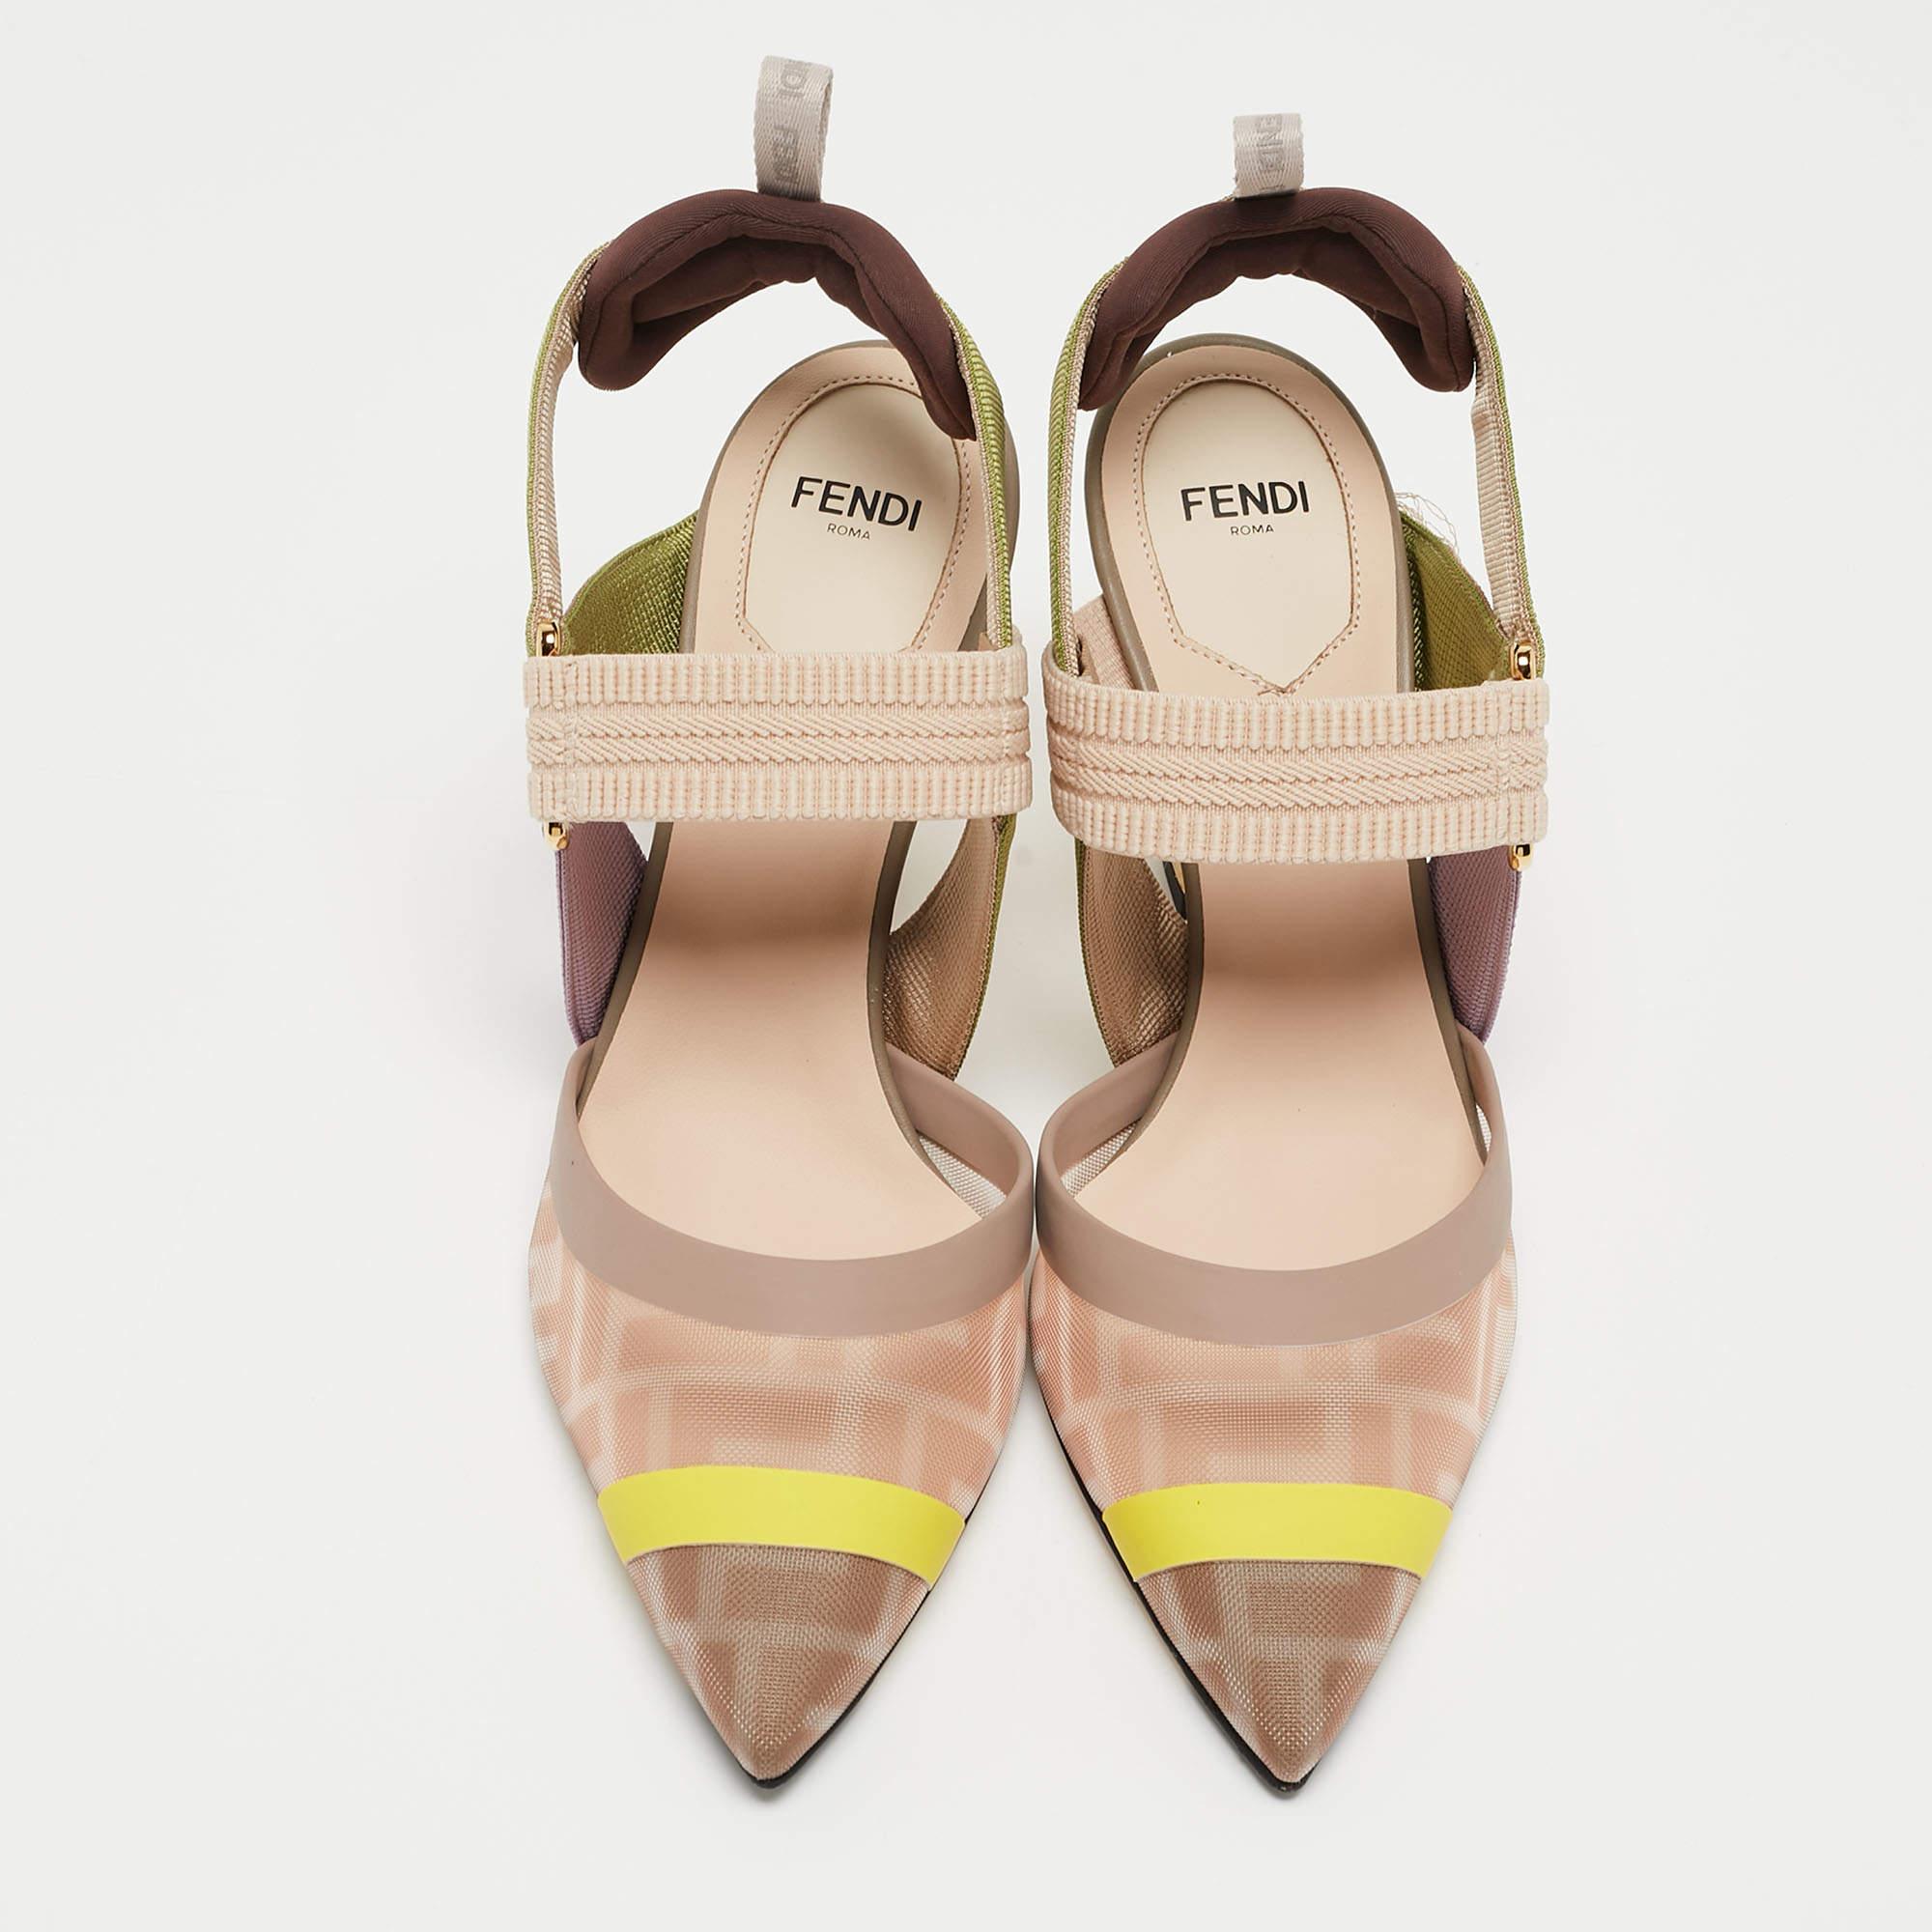 Make a chic style statement with these Fendi pumps. They showcase sturdy heels and durable soles, perfect for your fashionable outings!

Includes: Original Dustbag, Original Box, Info Booklet

